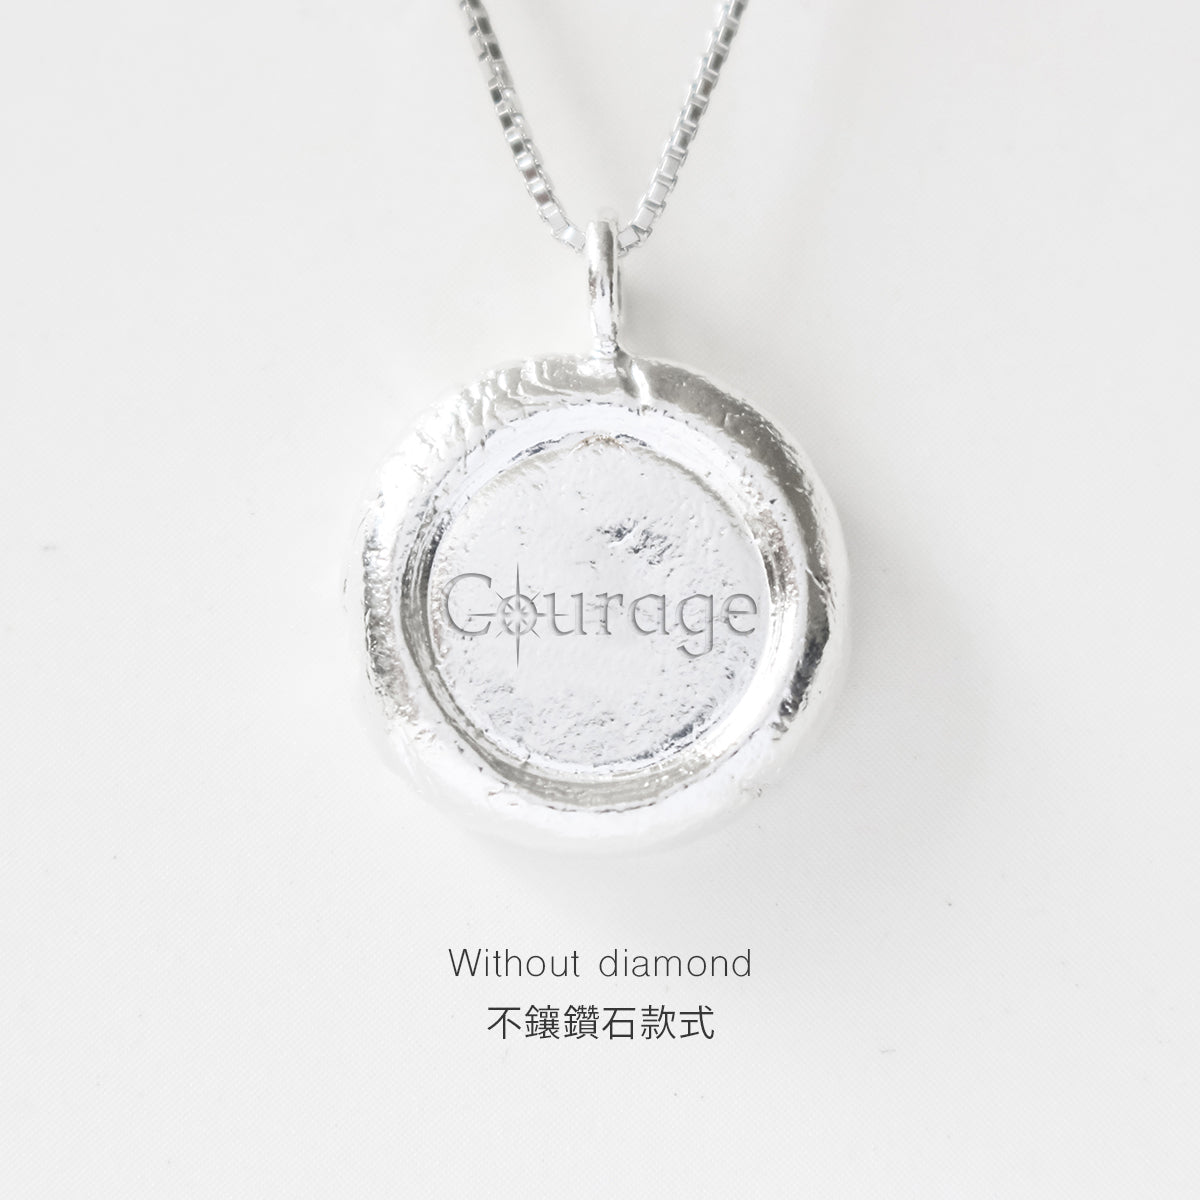 Courage - Empowerment Diamond Silver Necklace